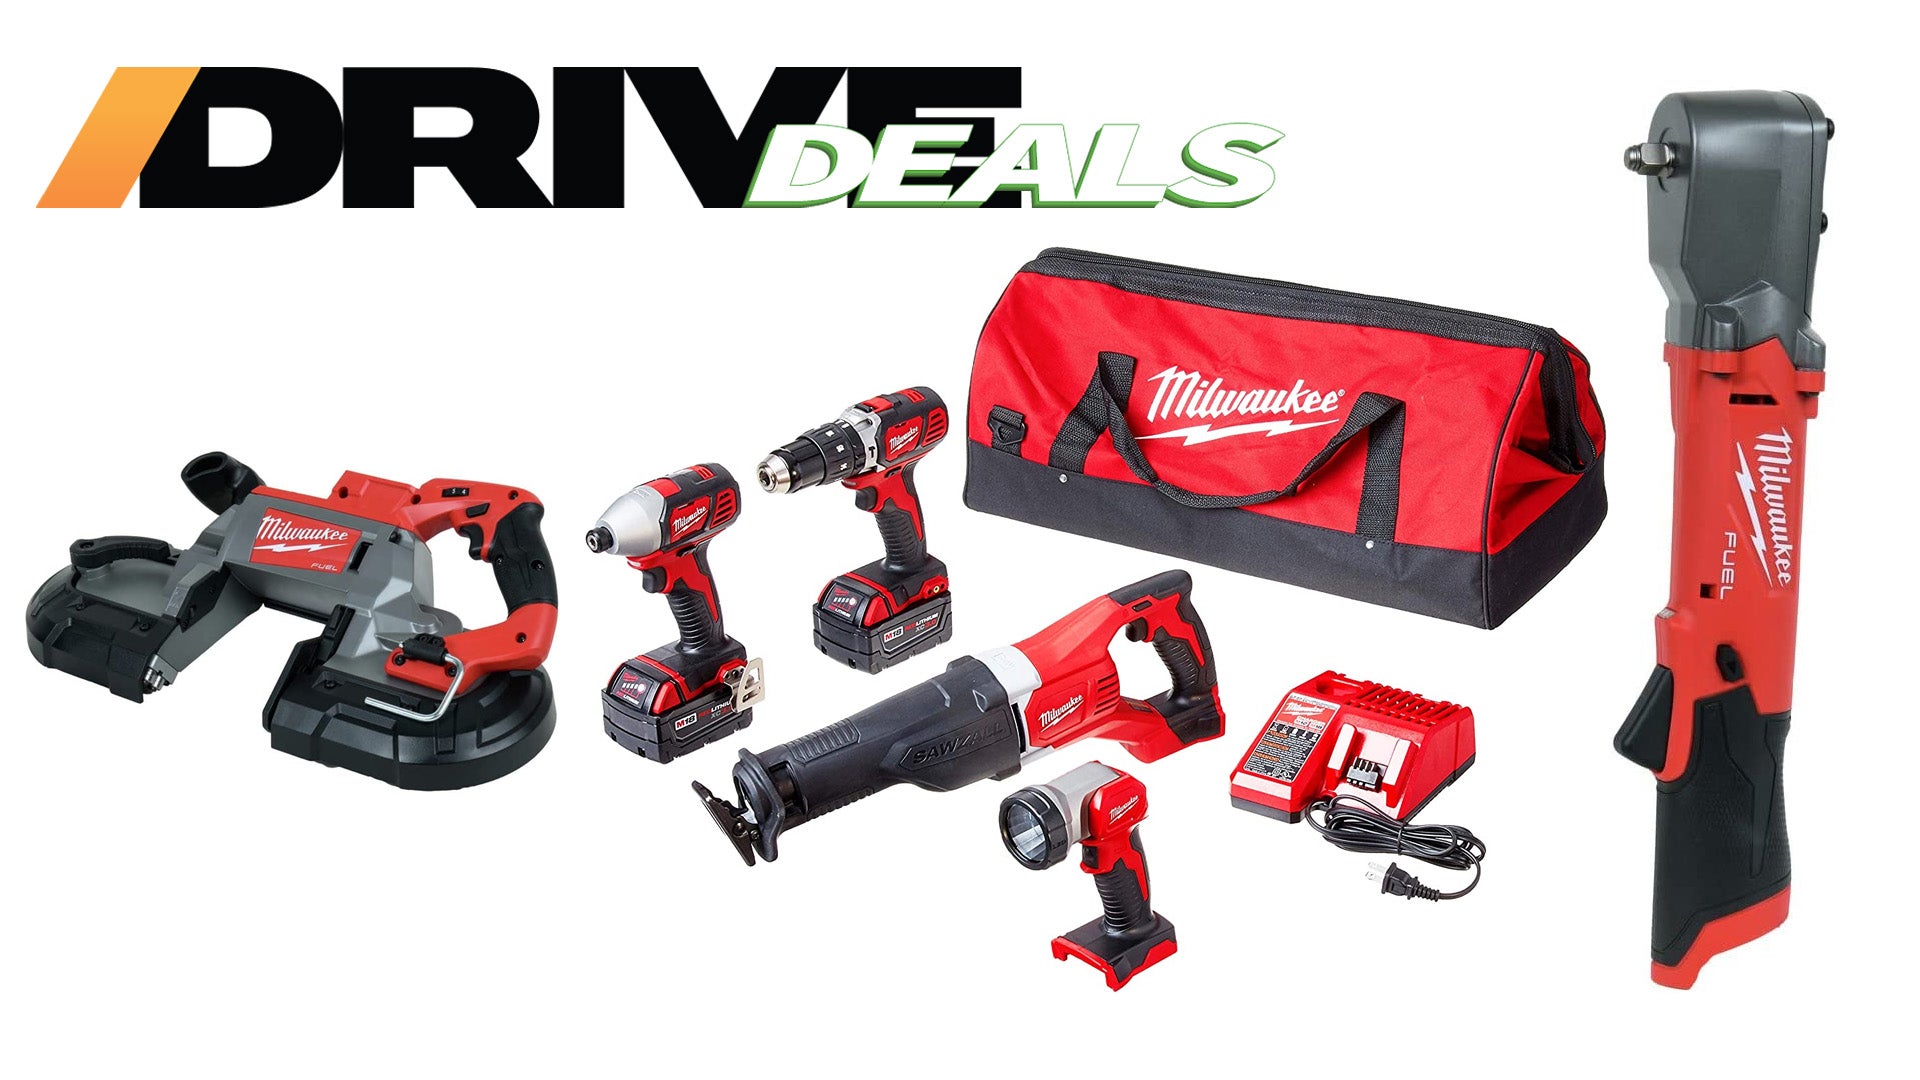 These Discounted Milwaukee Power Tools Will Get the Job Done